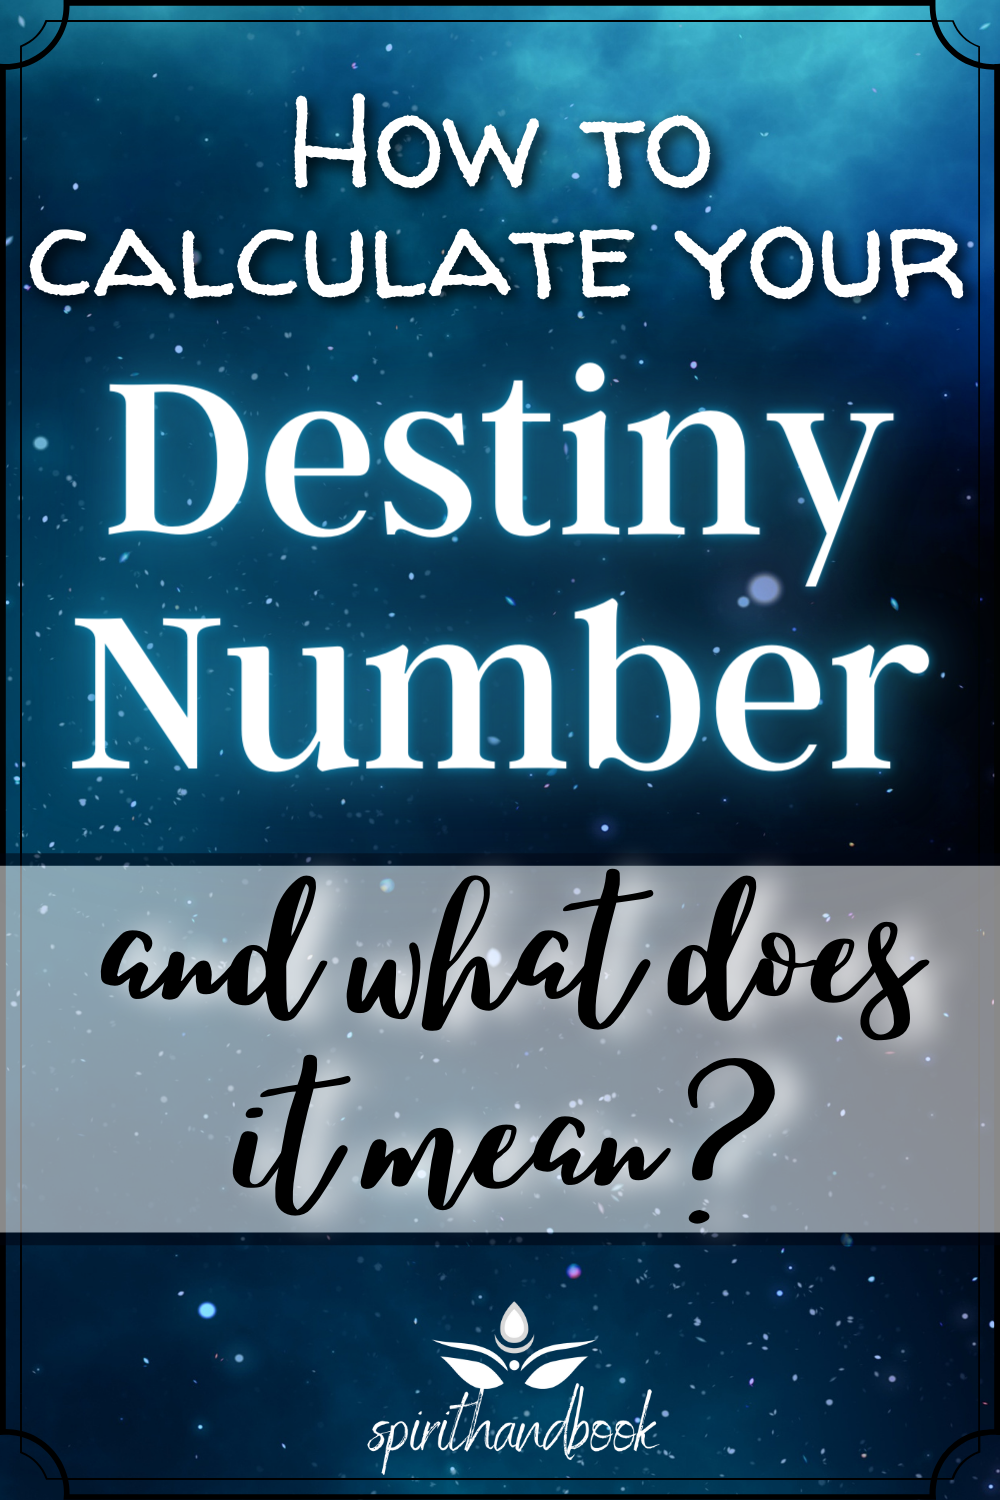 Destiny numbers: How to calculate your destiny number and what does it mean